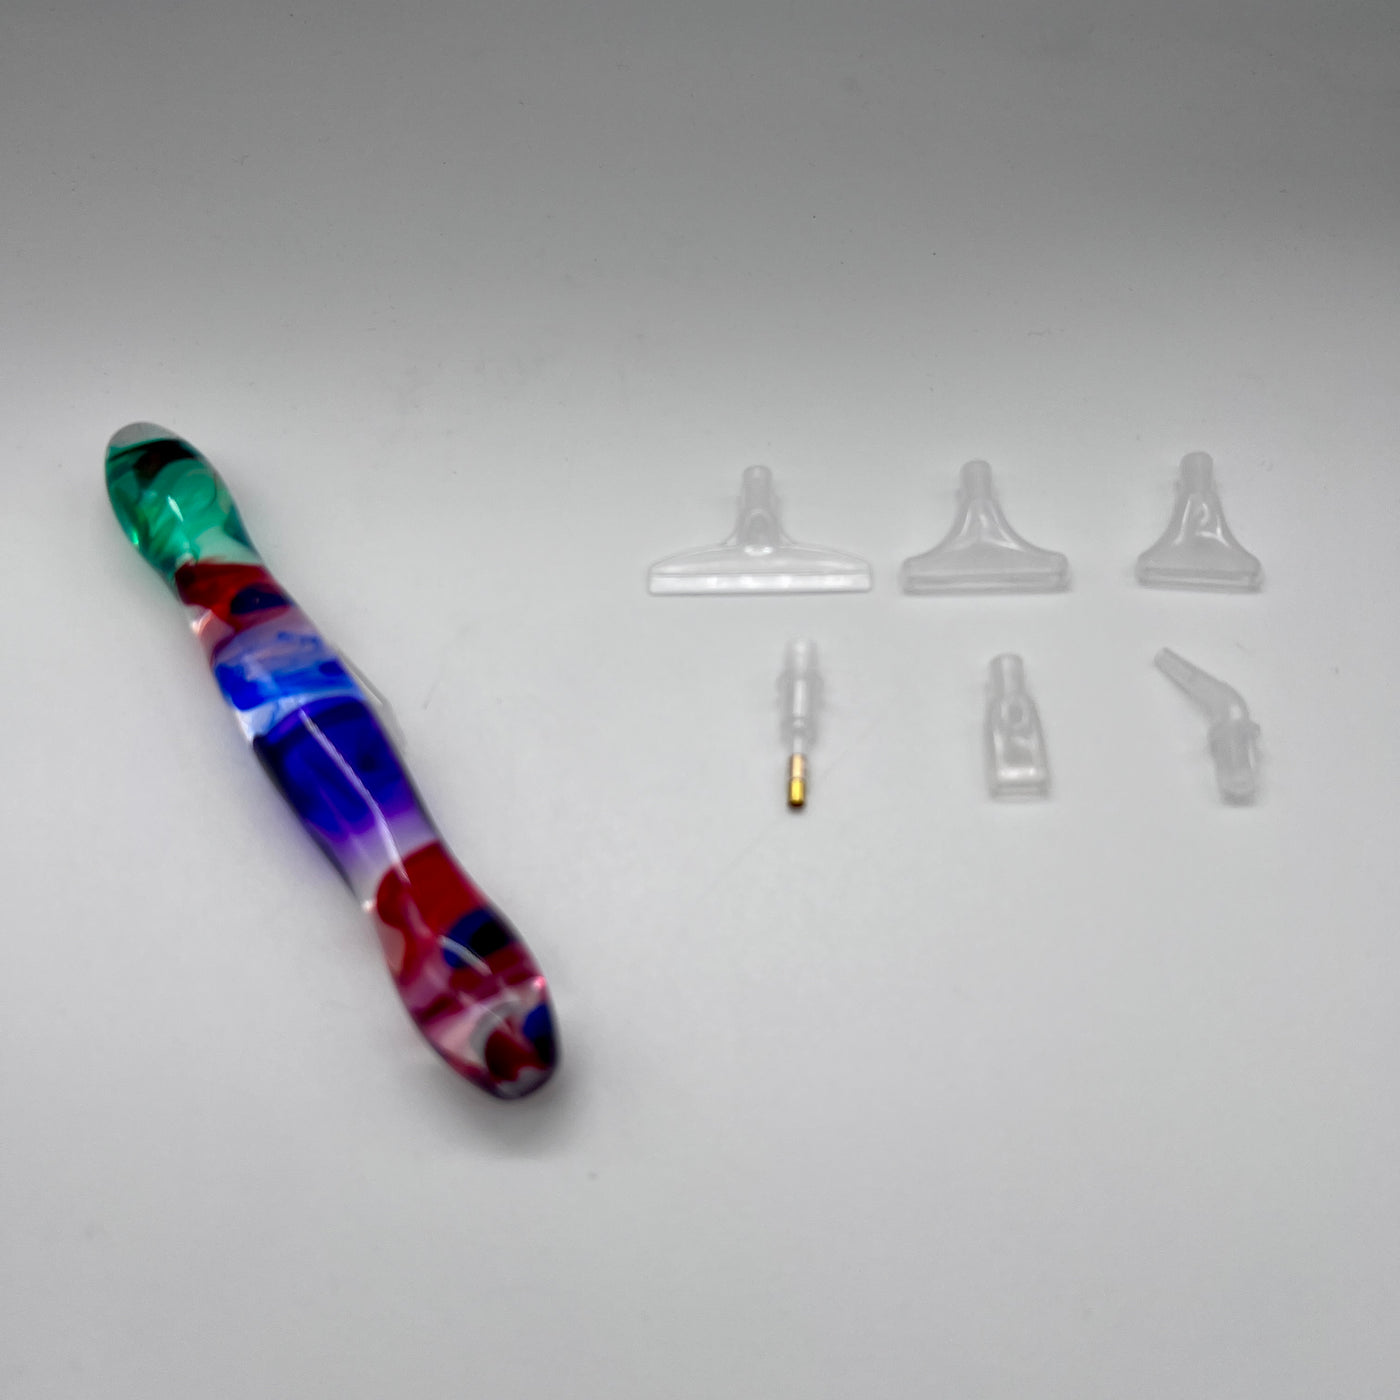 Premium Resin Drill Pen with Tips, and Wax Storage Case